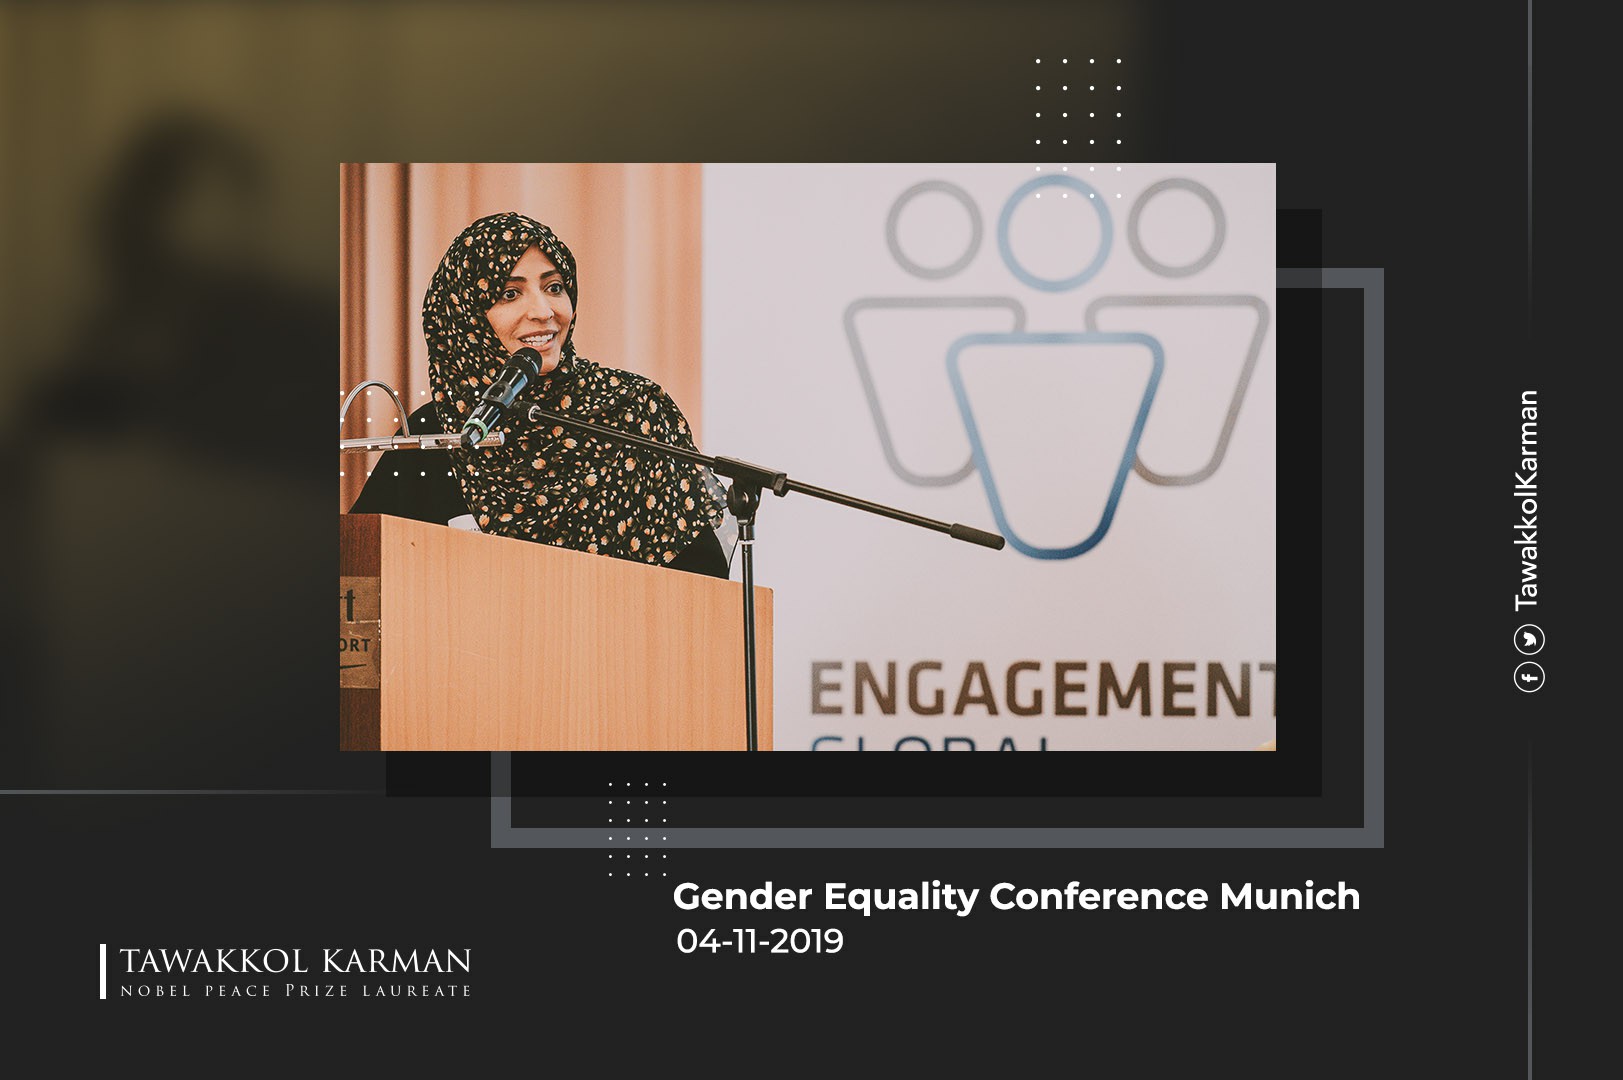 Participation of Tawakkol Karman in the Gender Equality Conference Munich